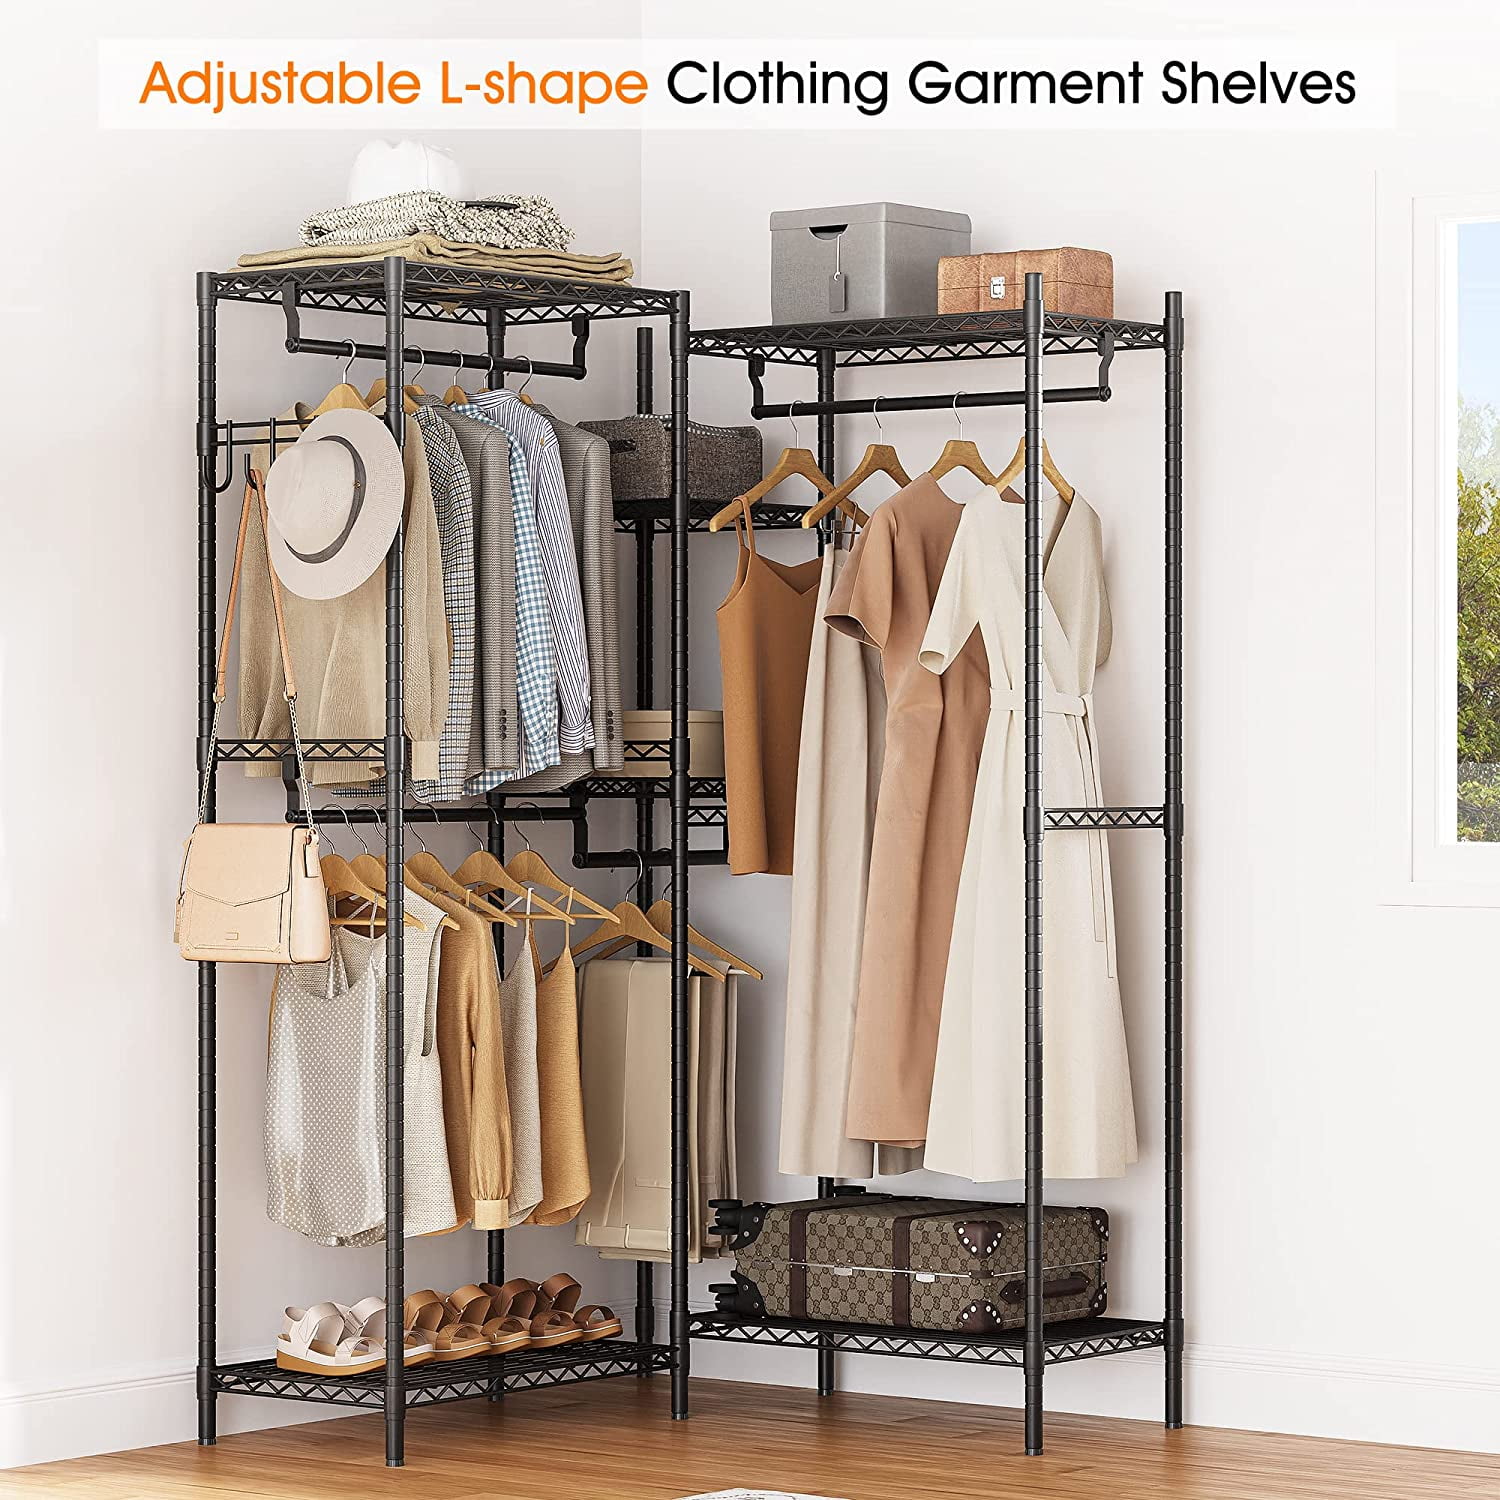 IDEALHOUSE Over The Washer and Dryer Storage Shelf- Laundry Room Organization Space Saving Laundry Drying Clothes Racks Heavy Duty Adjustable Height